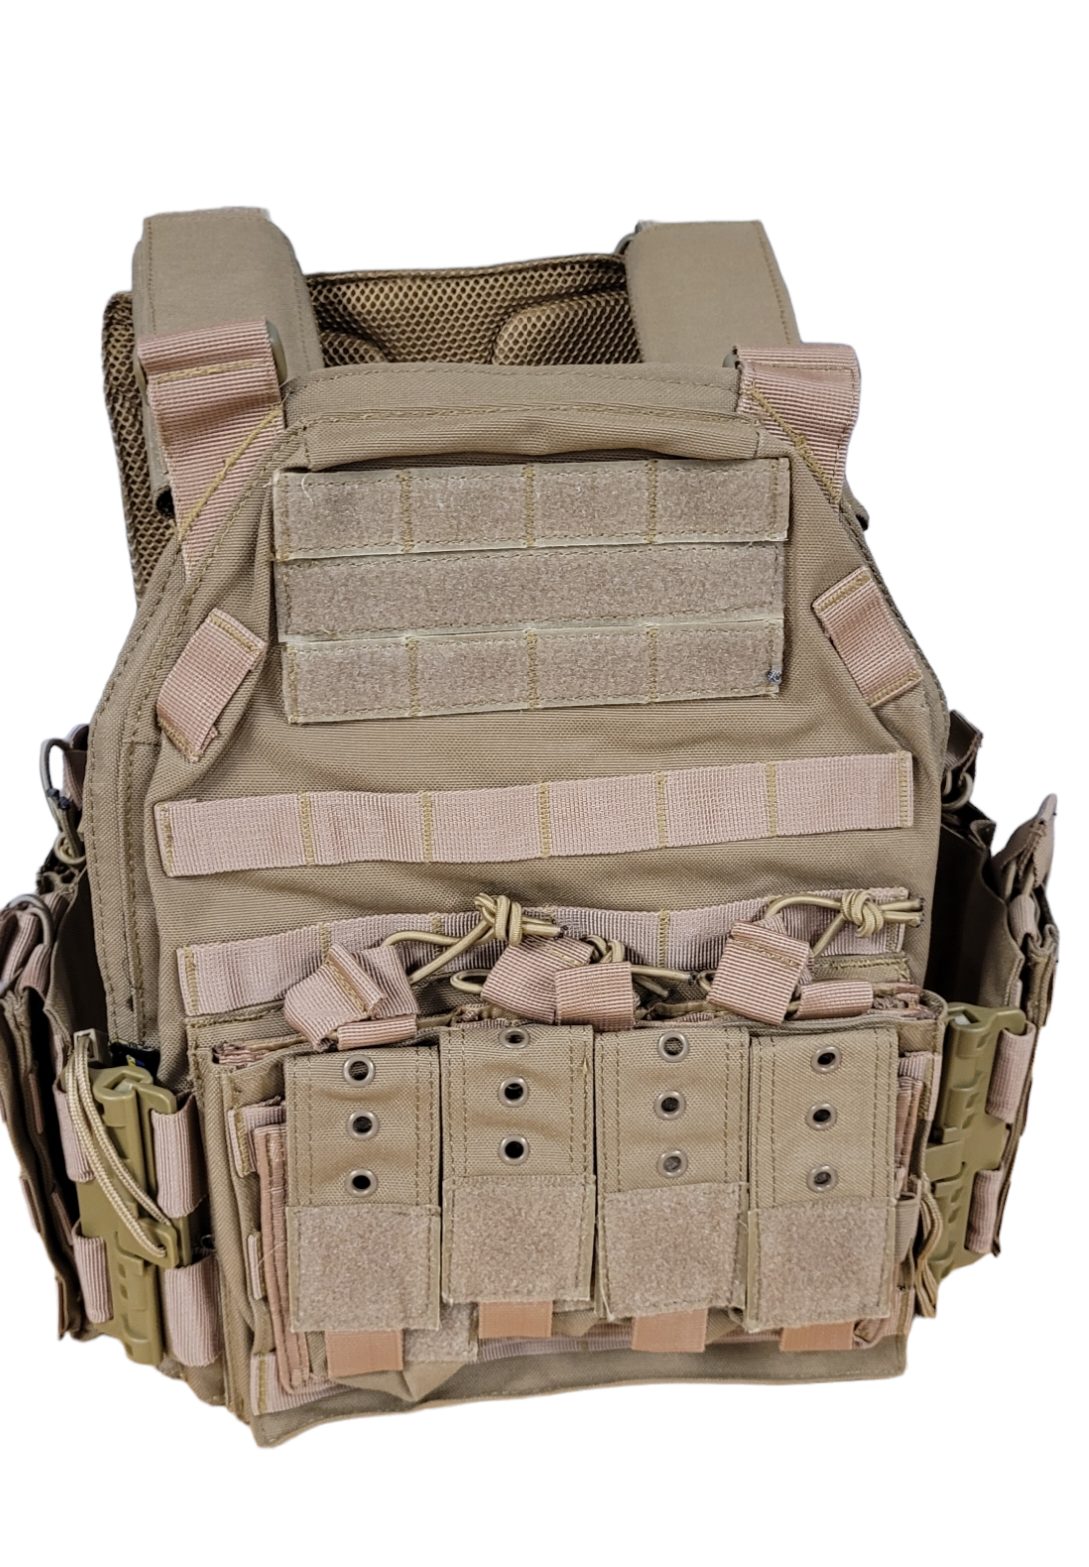 QUICK RELEASE TACTICAL VEST, 1000D NYLON, WITH POUCHES - PLATES CARRIER - Montreal  Firearms Recreational Center